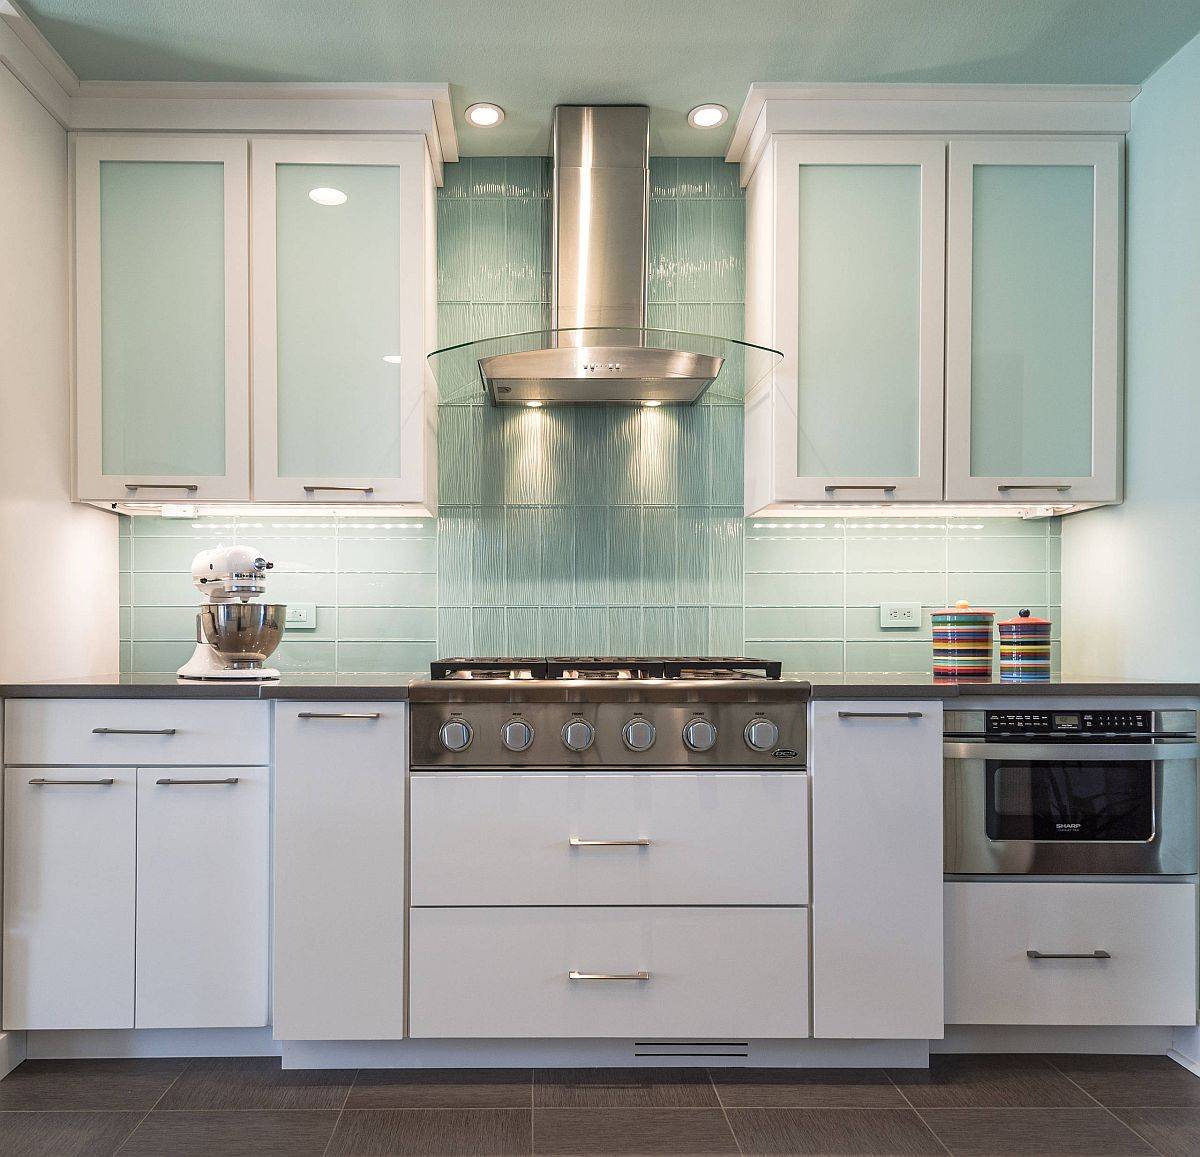 Vertical and horizontal tiles are beautifully combined to create this modern kitchen backsplash